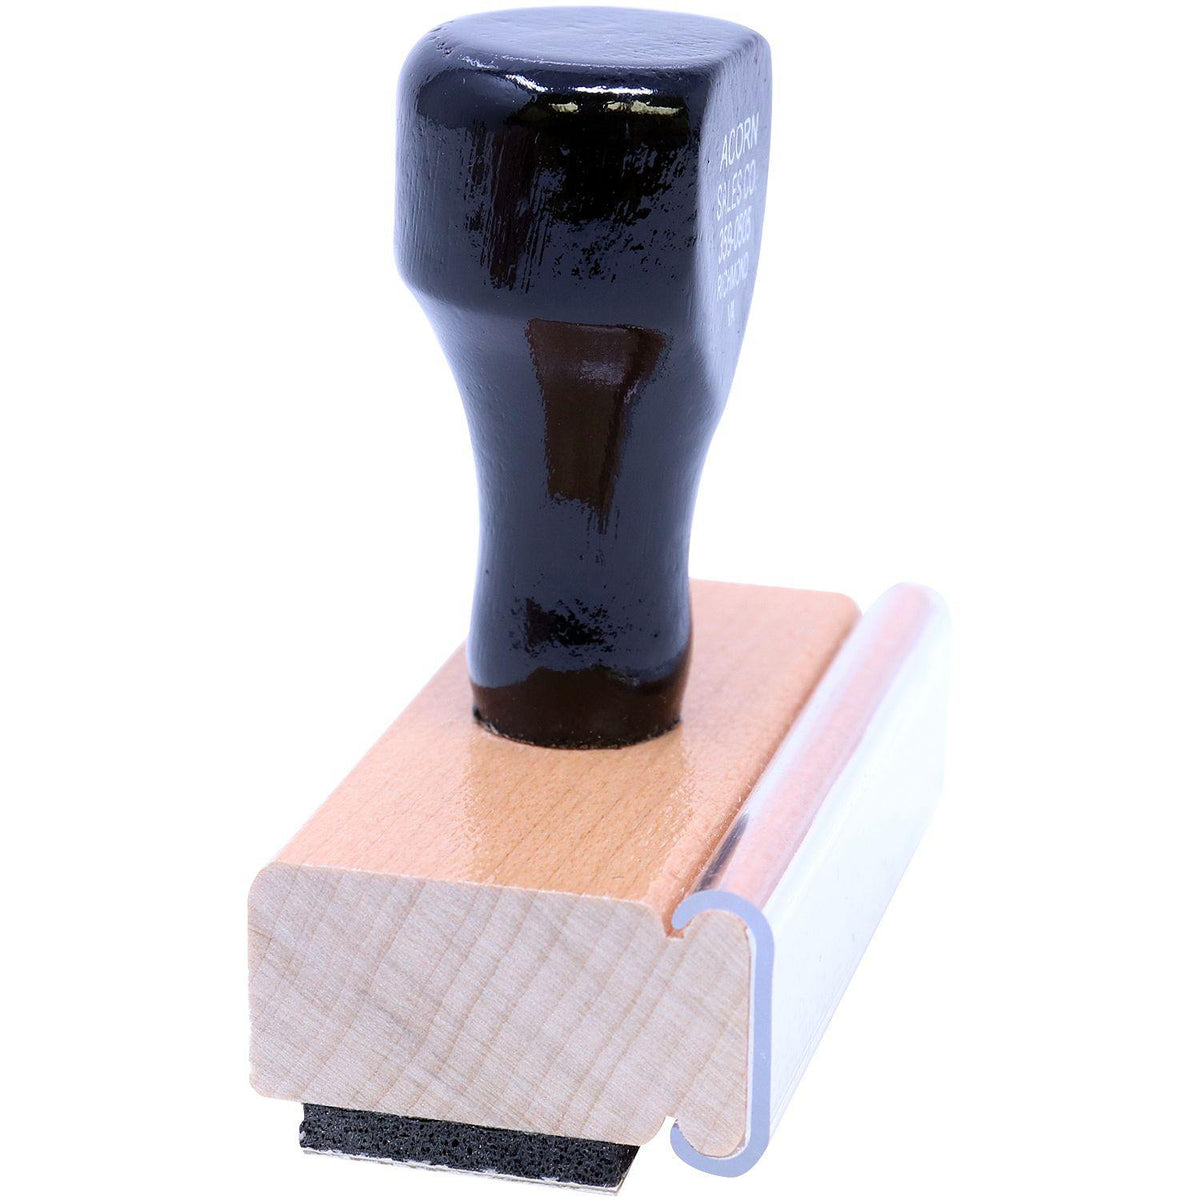 Side View of Large Redacted Rubber Stamp at an Angle